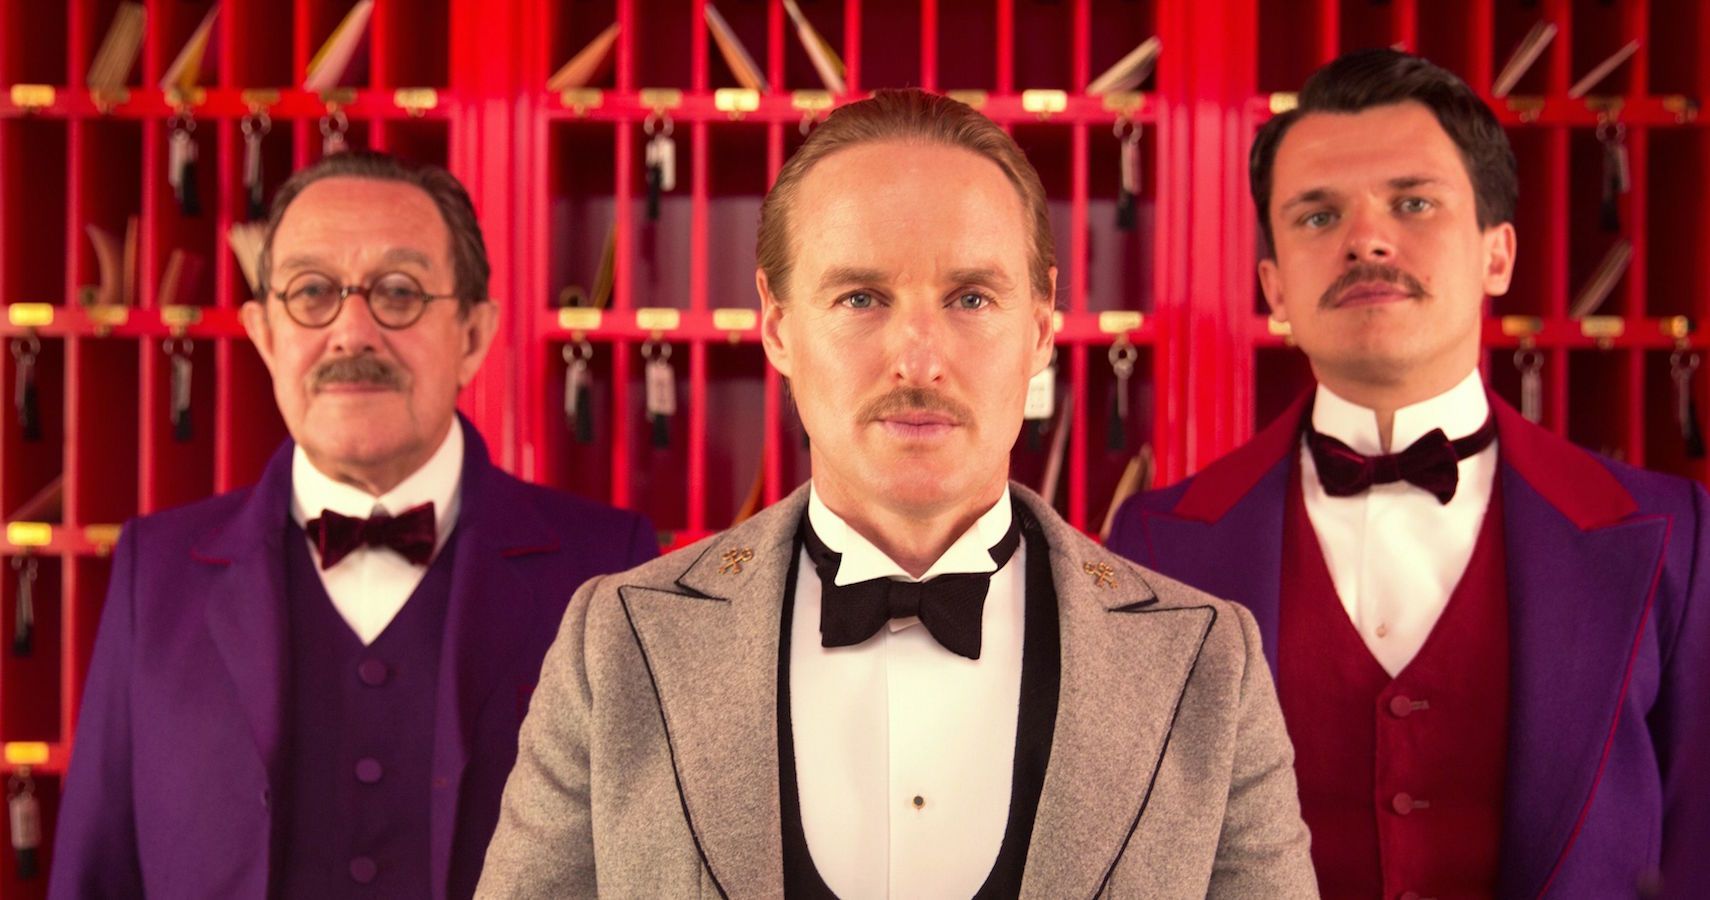 Owen Wilson as a concierge in The Grand Budapest Hotel